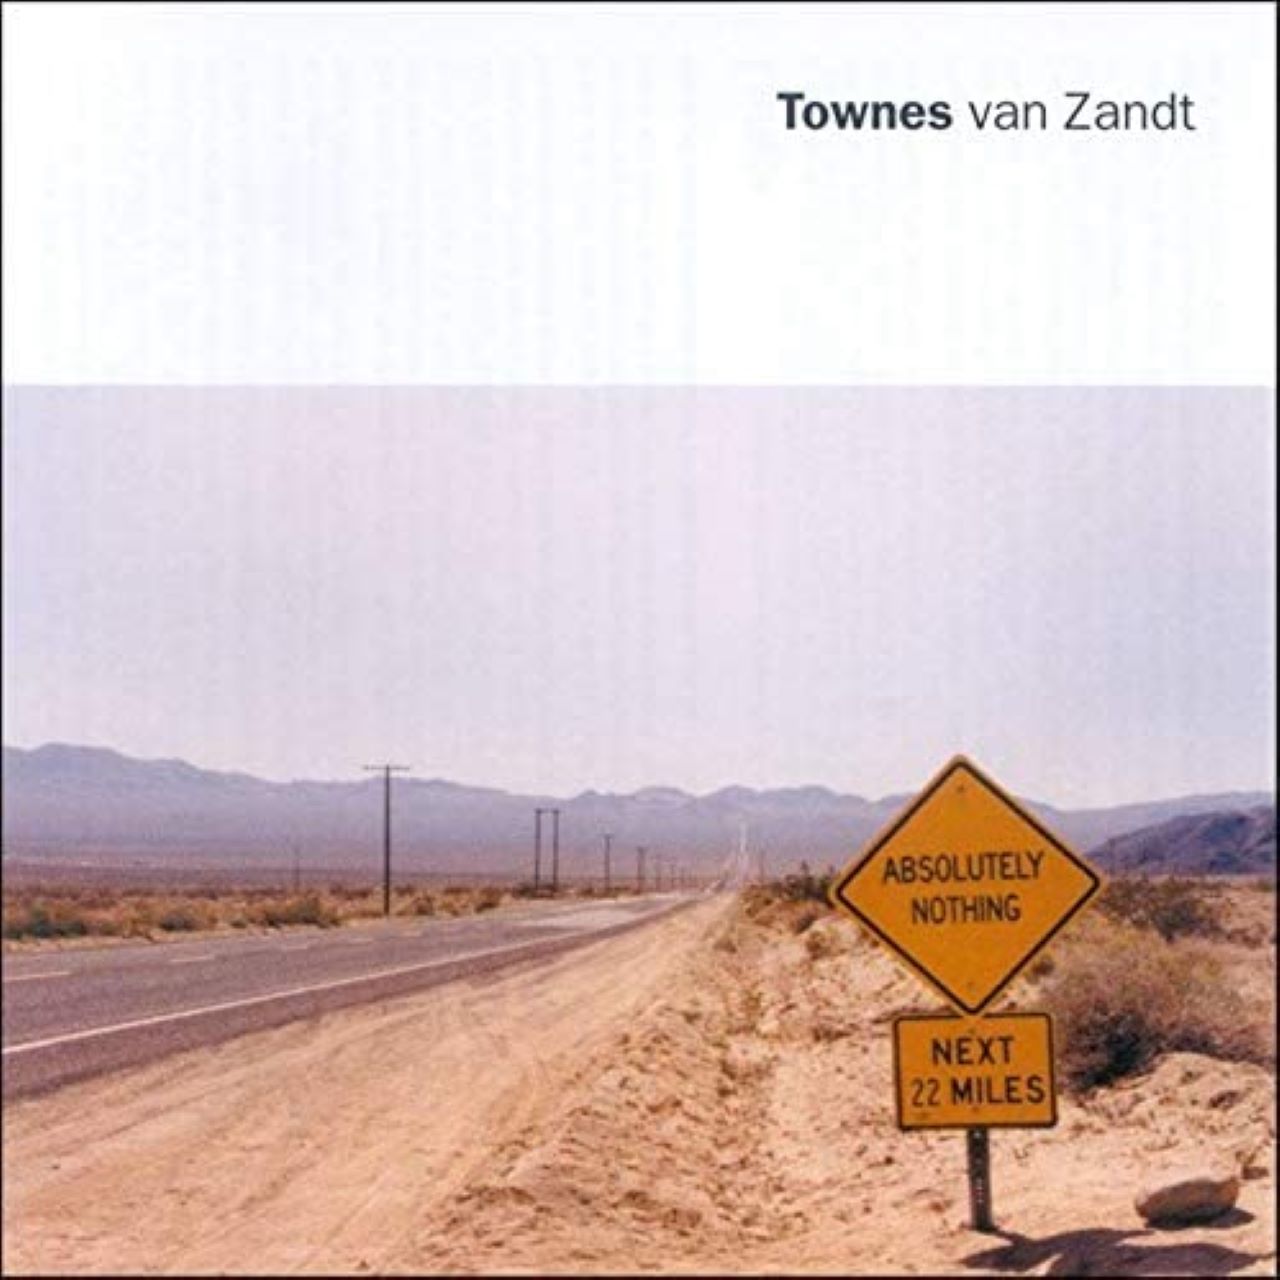 Townes Van Zandt - Absolutely Nothing cover album